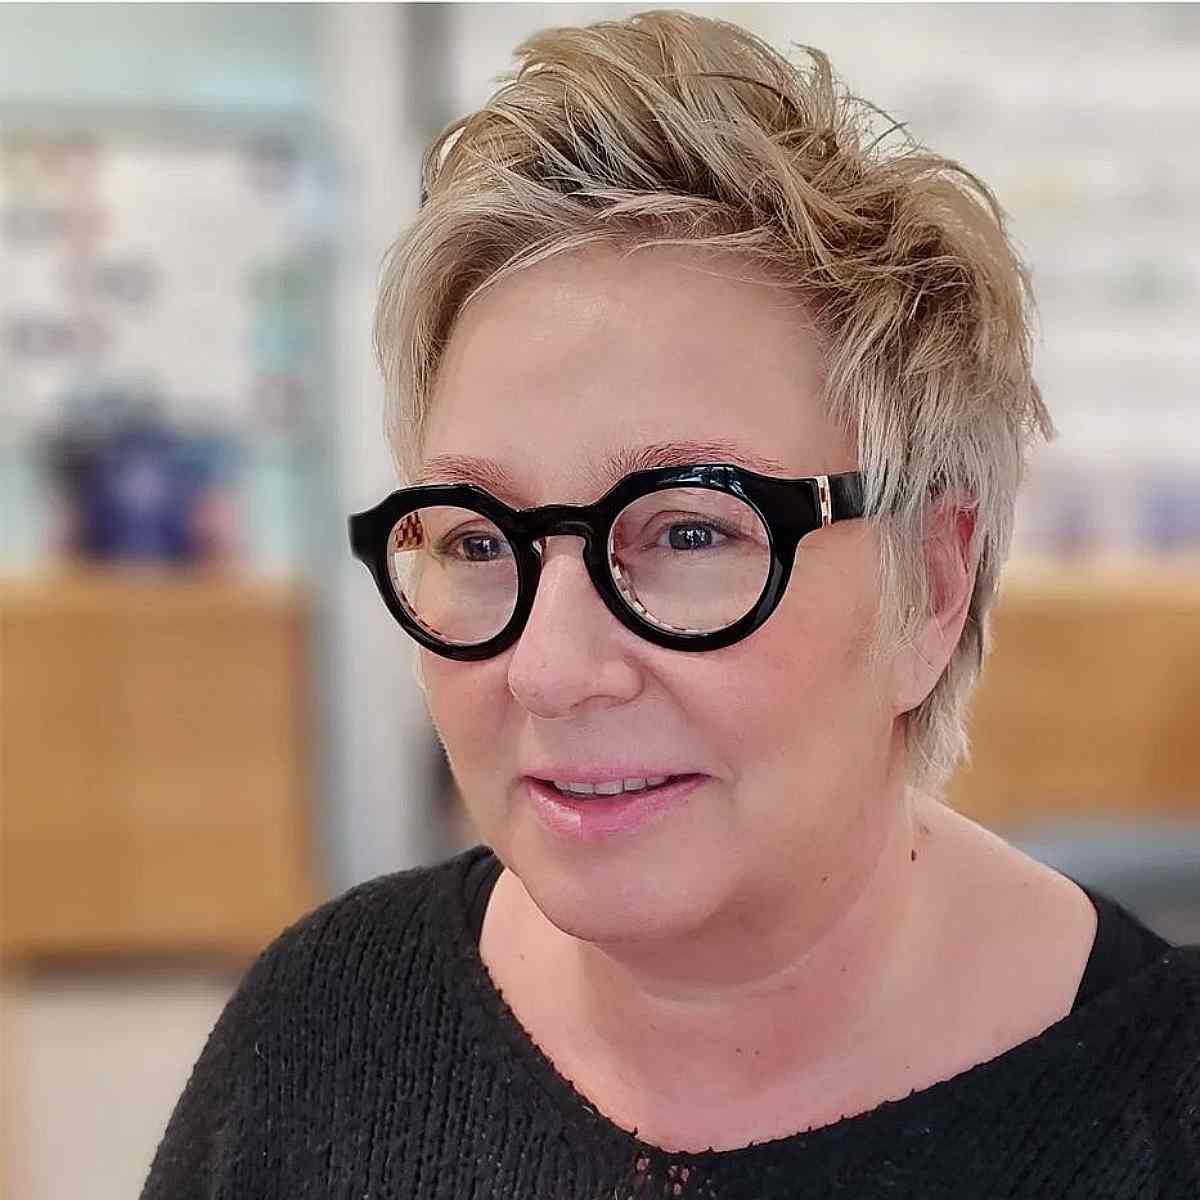 Short Choppy Pixie Quiff for ladies in their 50s with Round Glasses